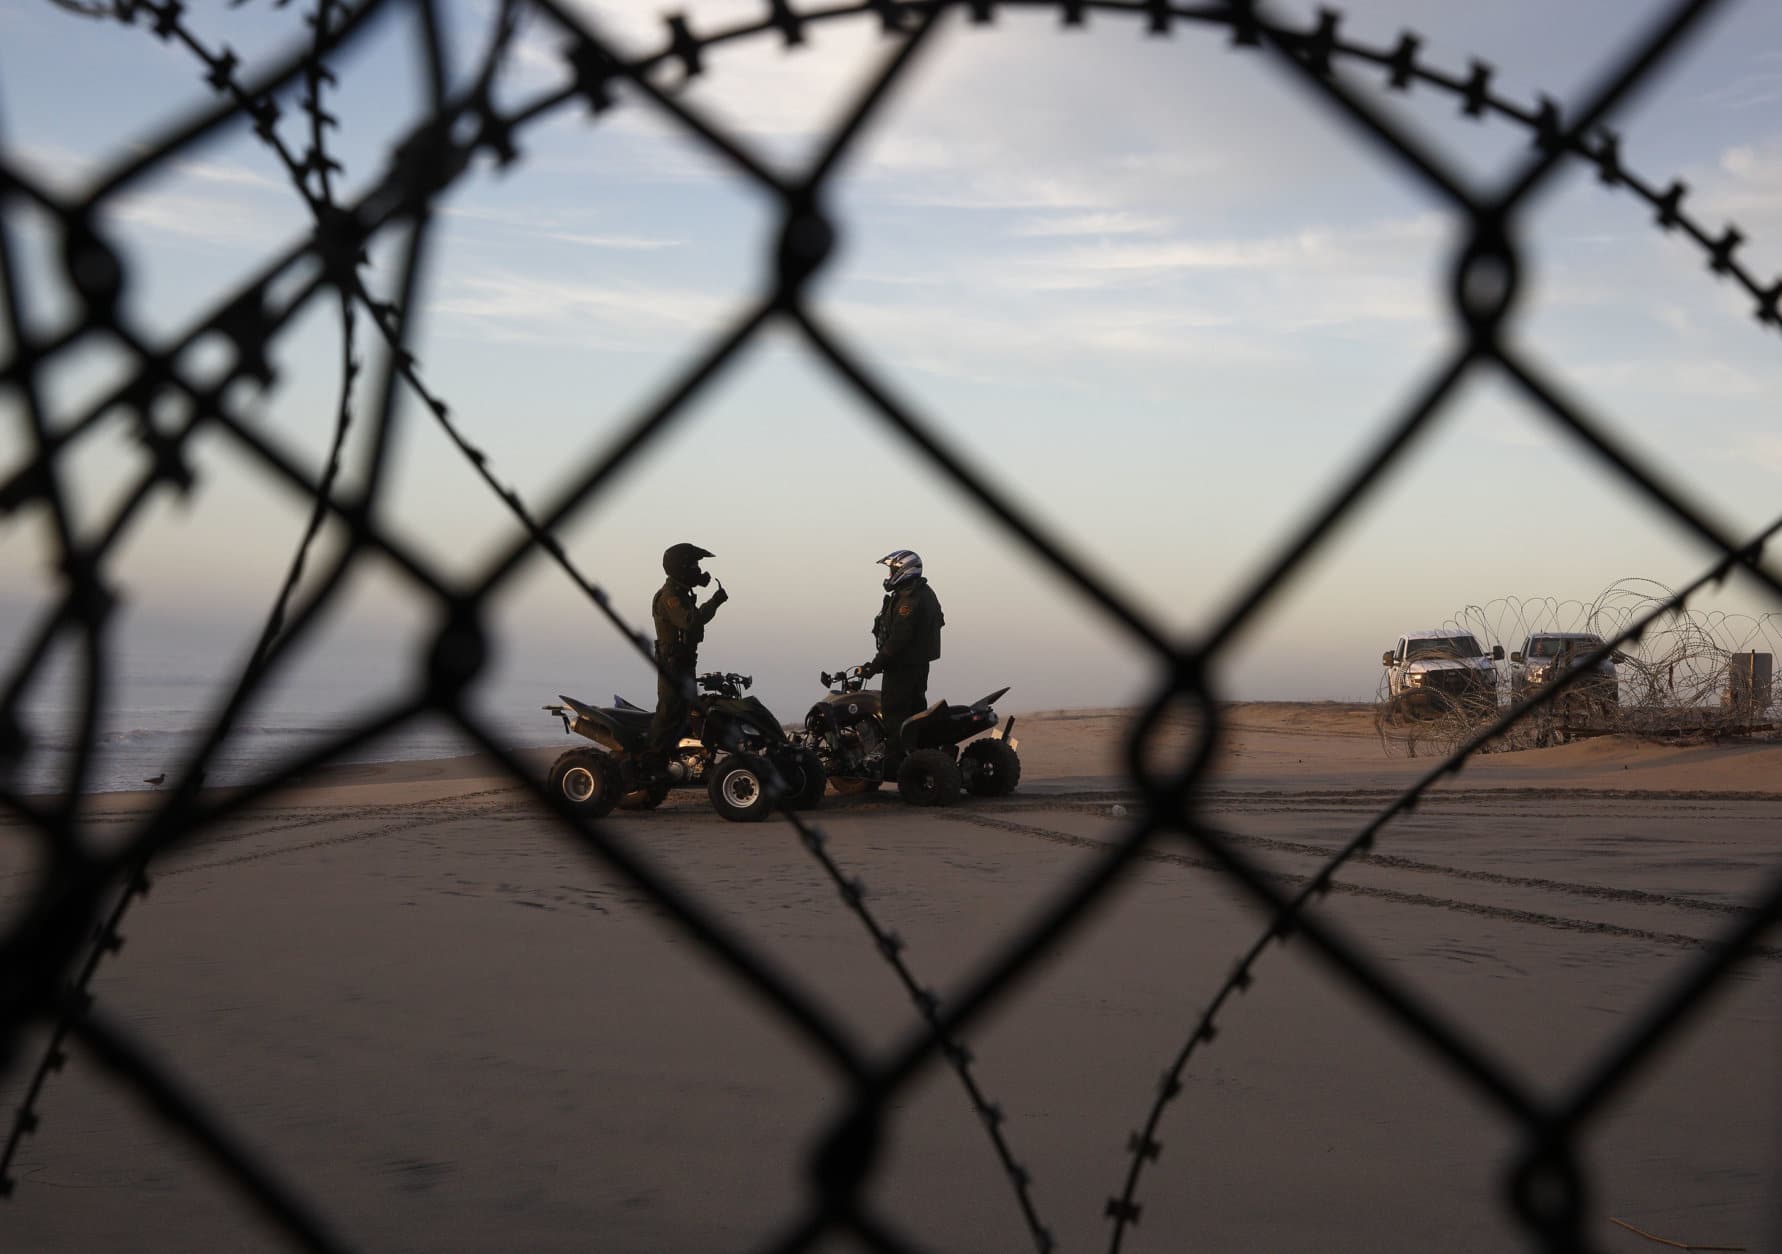 Two U.S. Border Patrol agents talk along the beach in San Diego, Wednesday, Jan. 9, 2019, seen through razor wire lining the border wall from Tijuana, Mexico. U.S. President Donald Trump walked out of his negotiating meeting with congressional leaders Wednesday — "I said bye-bye," he tweeted— as efforts to end the 19-day partial government shutdown fell into deeper disarray over his demand for billions of dollars to build a wall on the U.S.-Mexico border. (AP Photo/Gregory Bull)